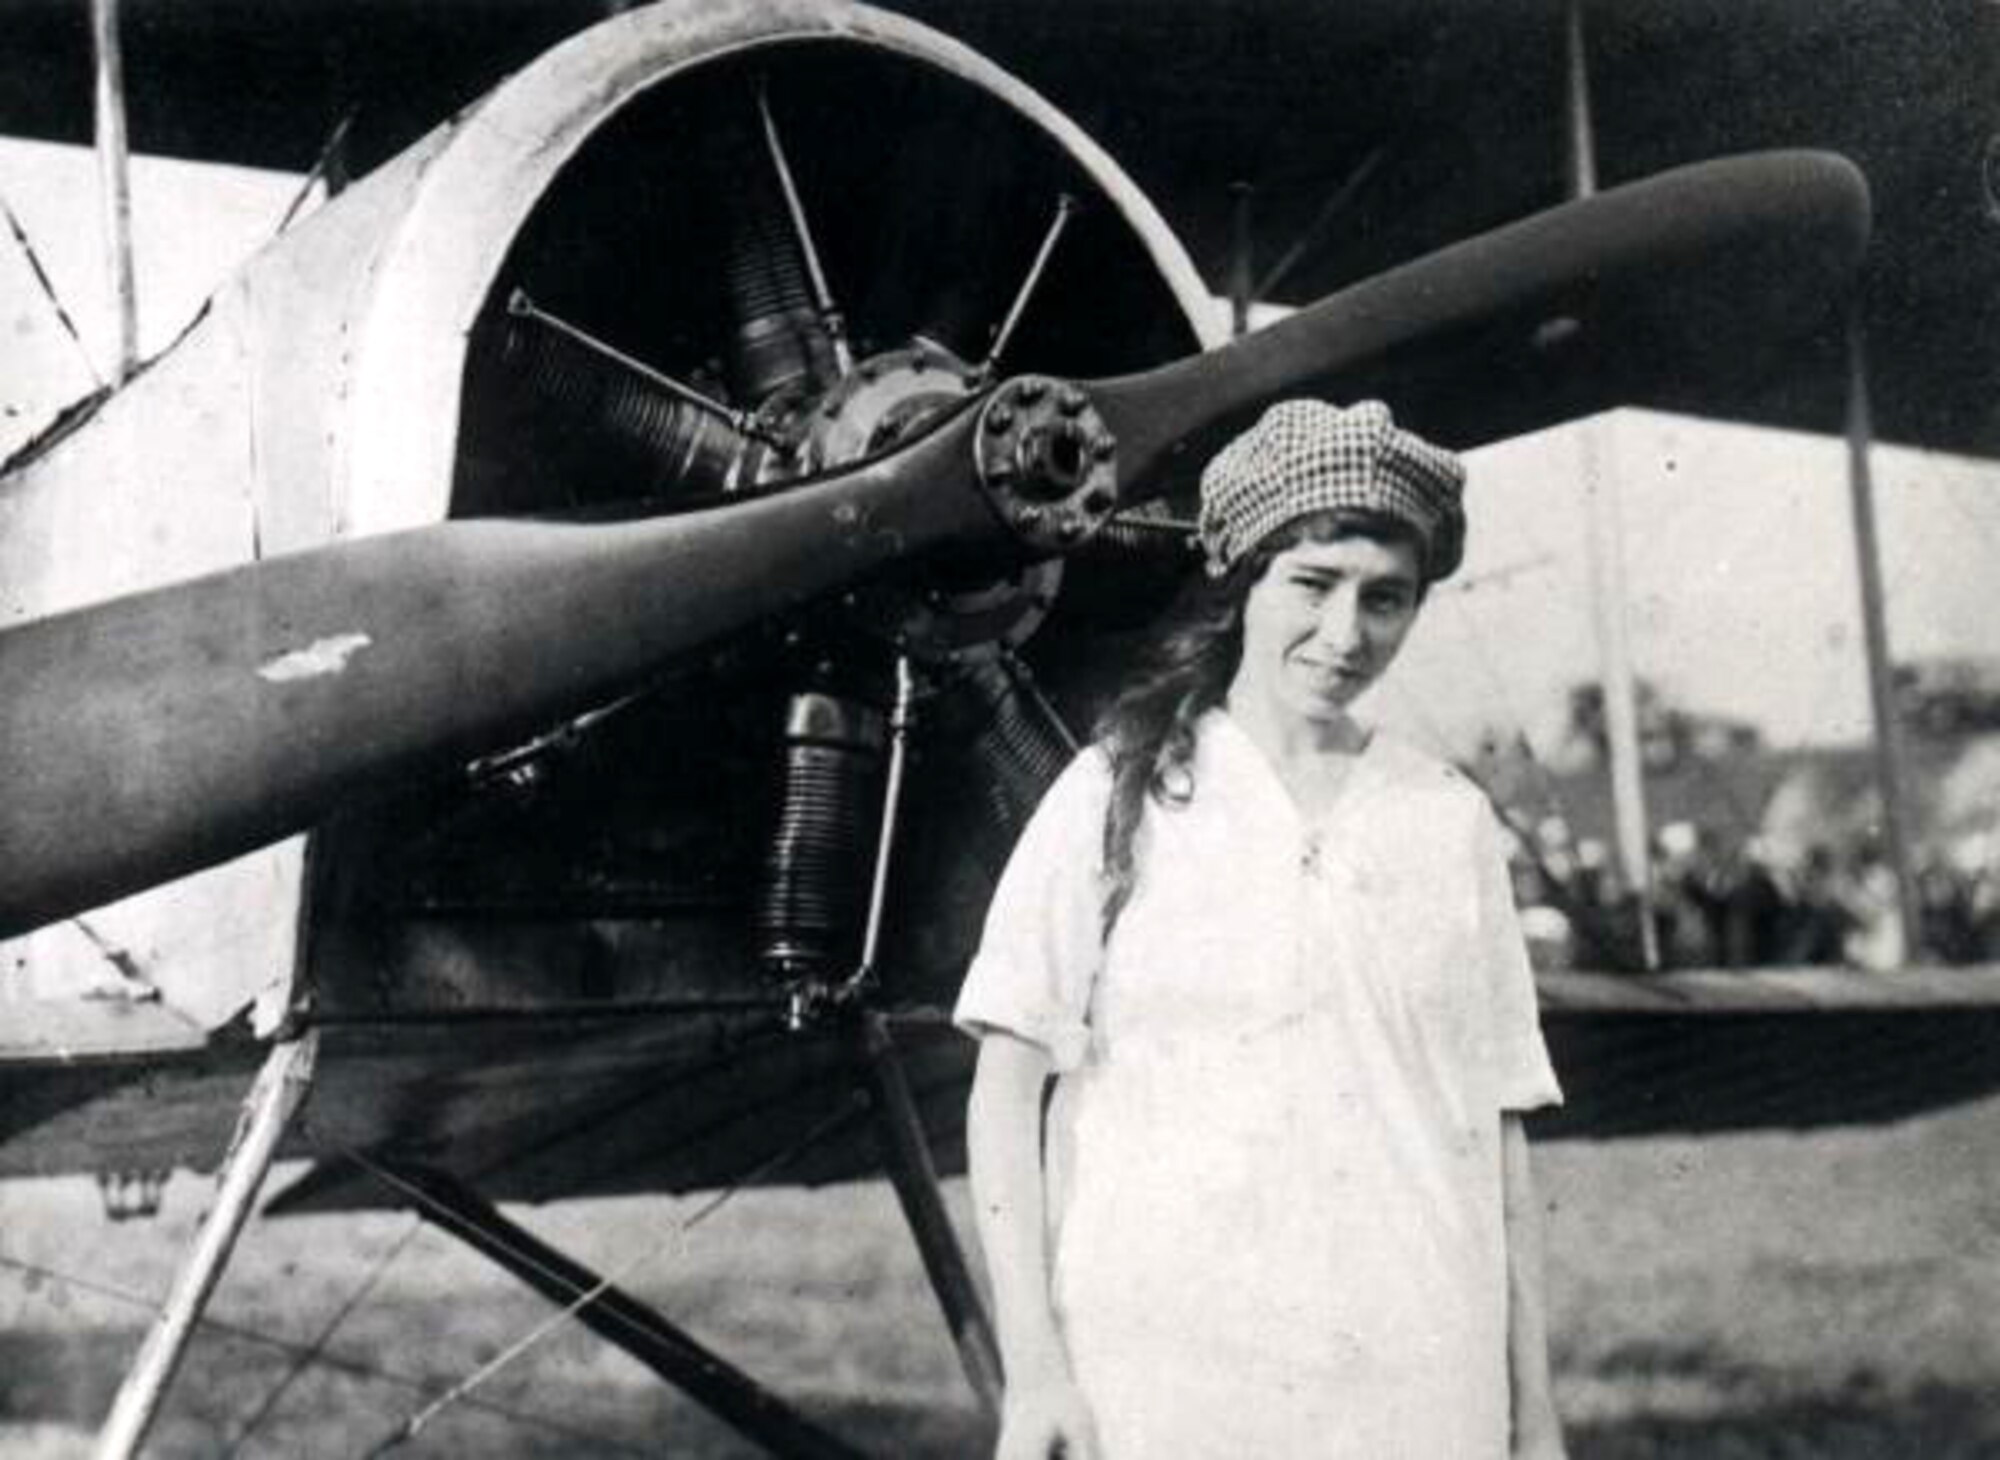 FILE PHOTO -- Katherine Stinson became one of the top pilots of her day and set many aviation firsts. (Photo courtesy of the University of New Mexico)